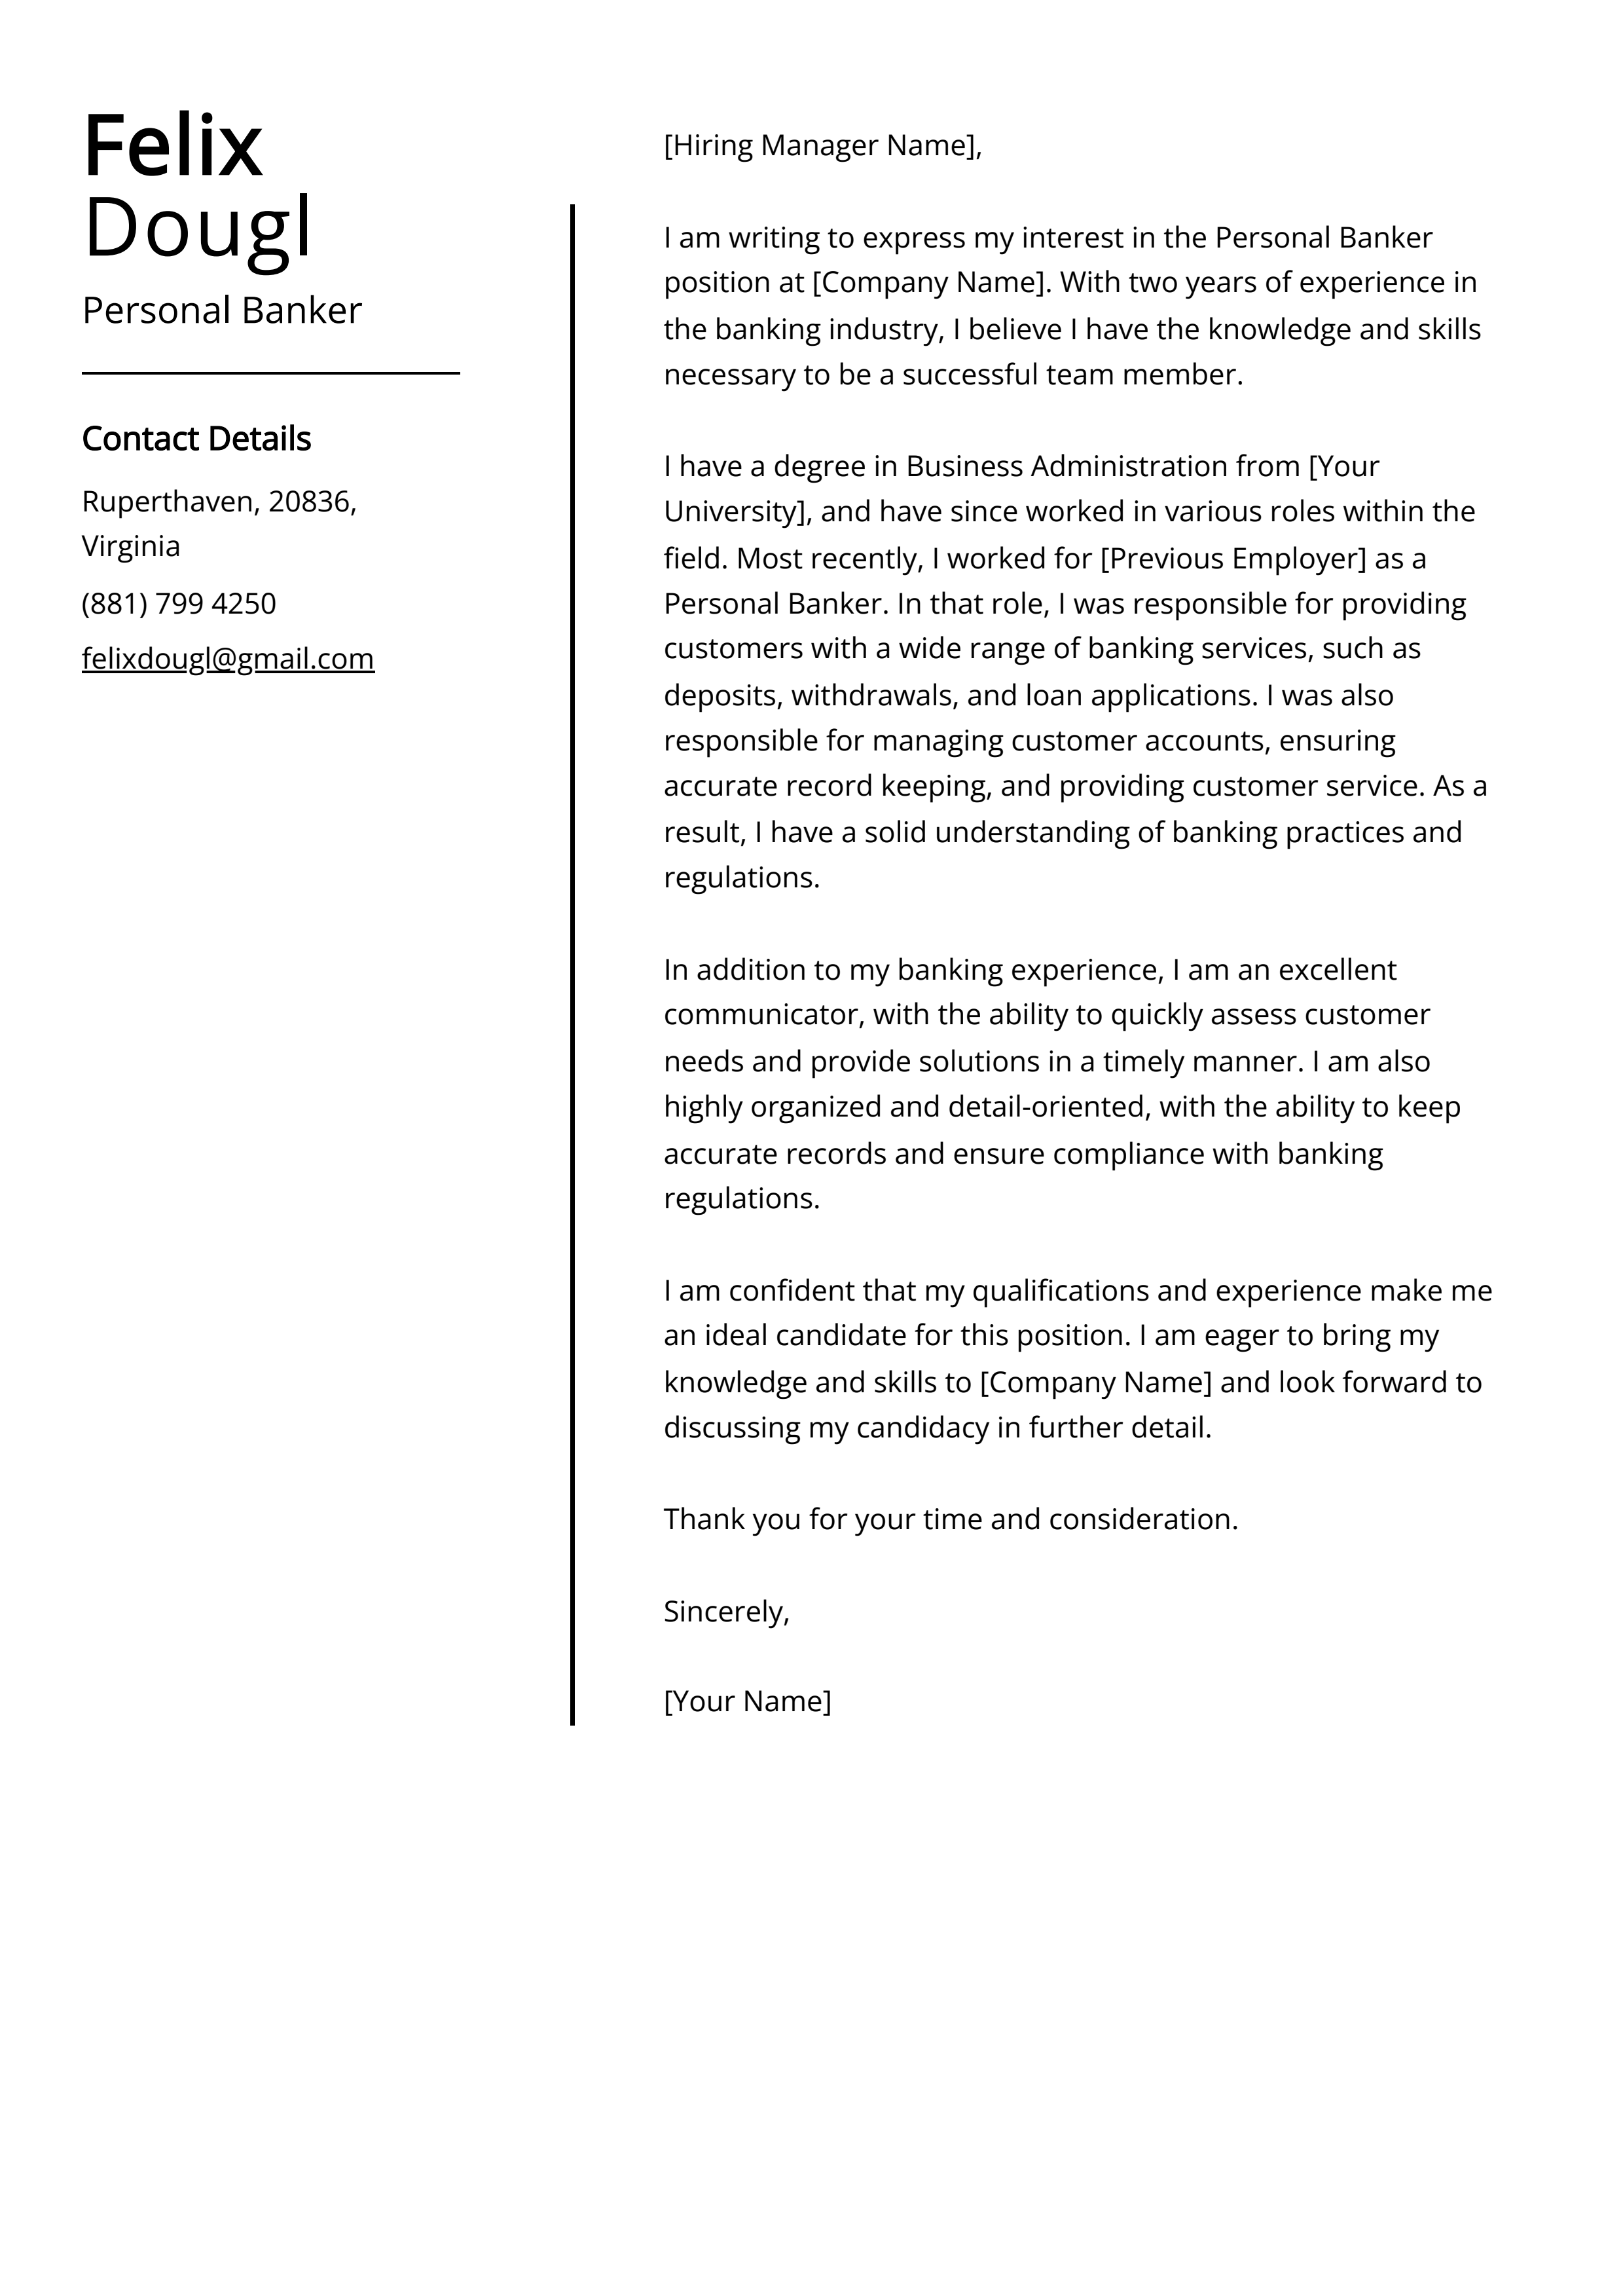 Personal Banker Cover Letter Example